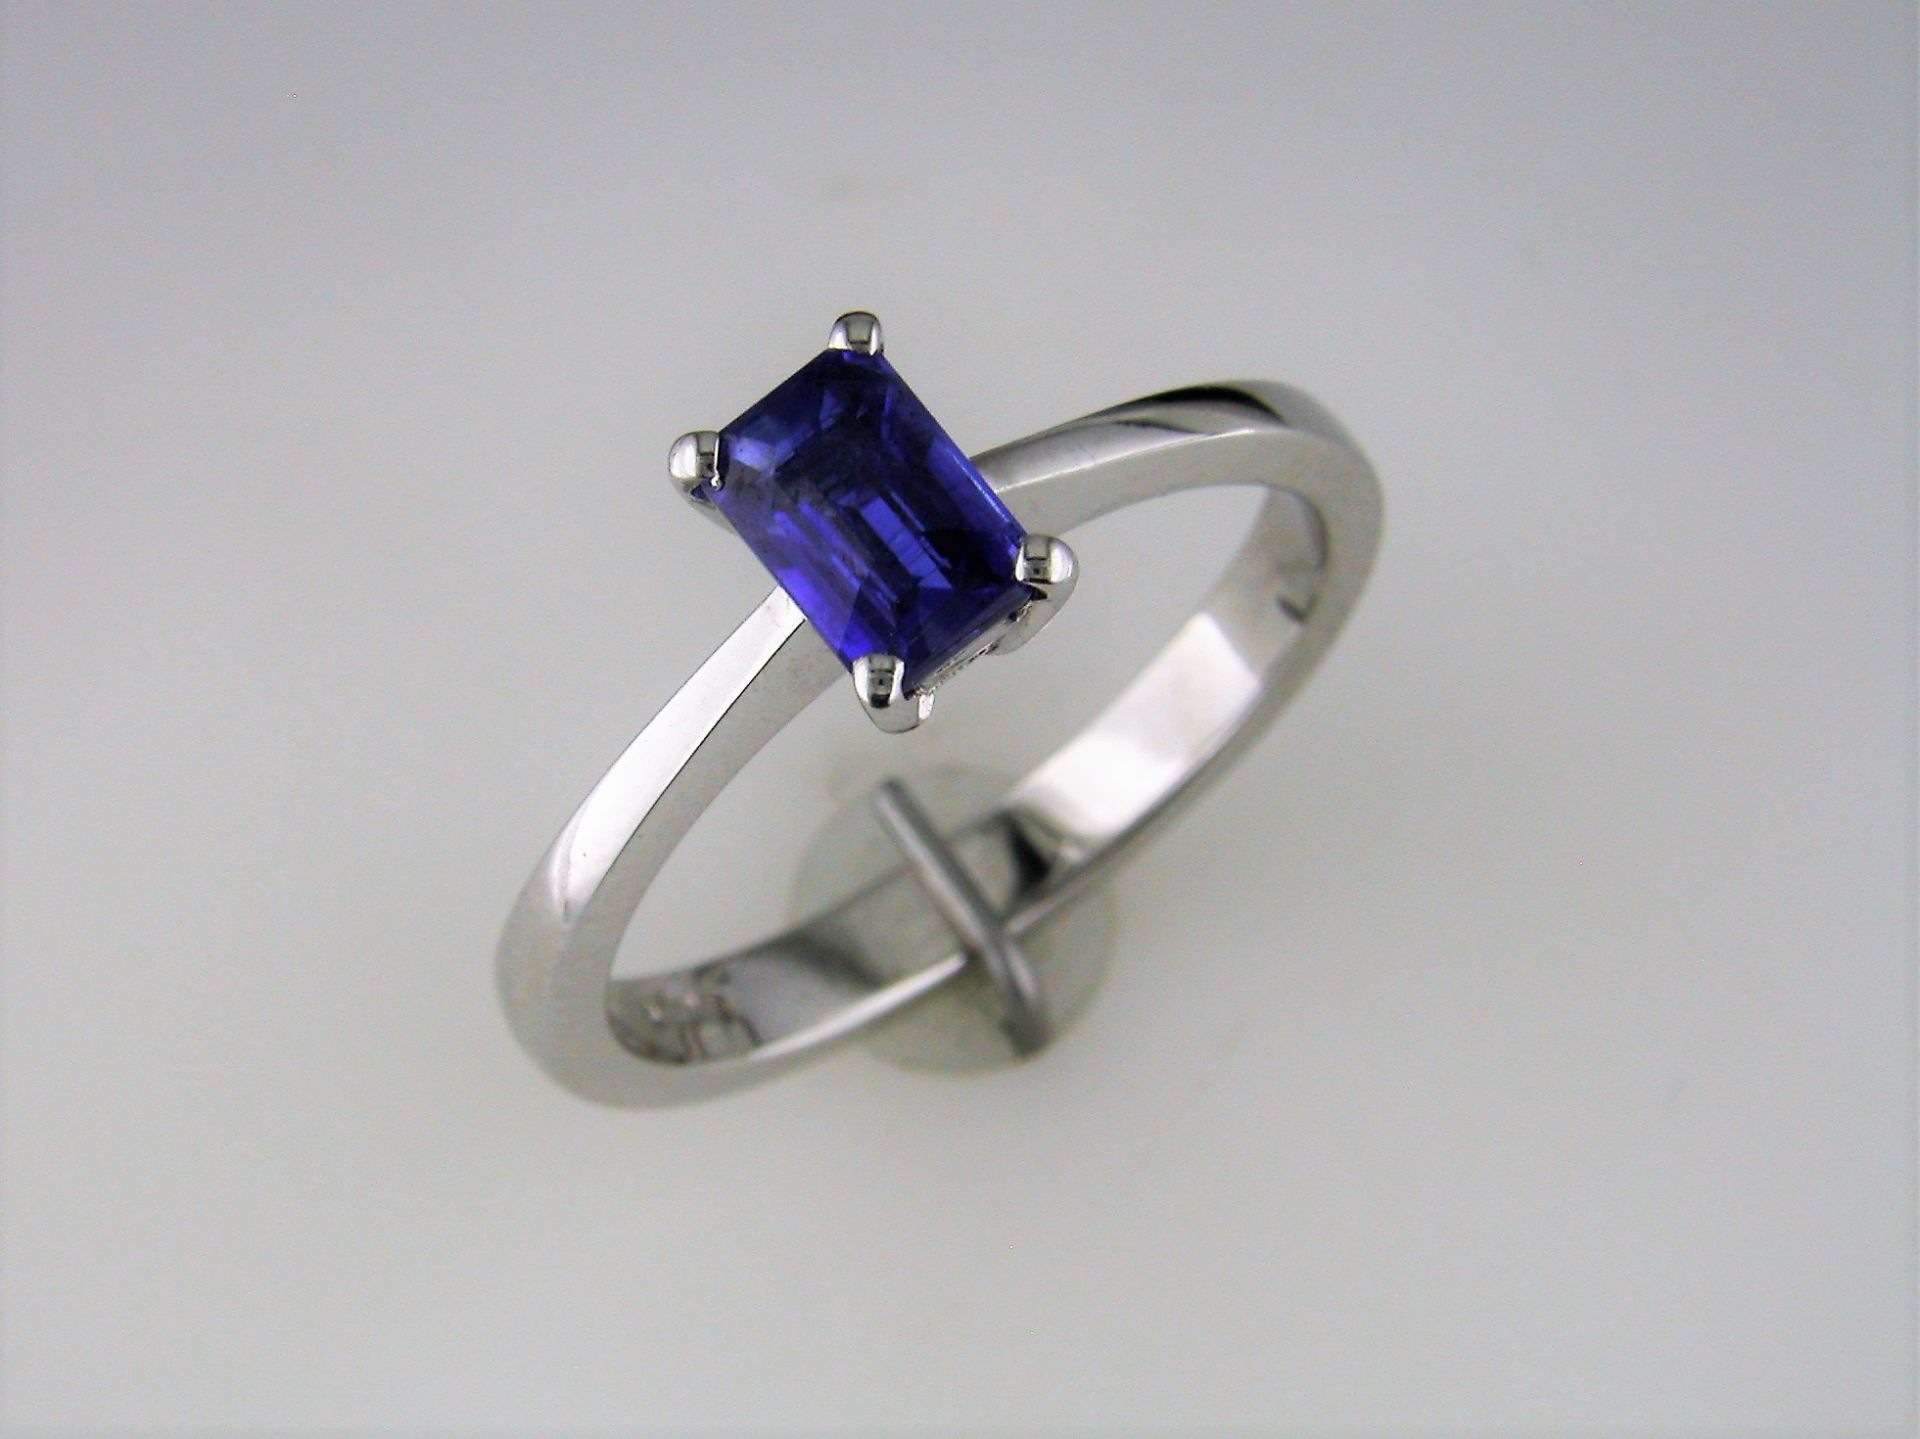 A Solitaire Ring set with a Kyanite Gemstone in an Emerald Cut